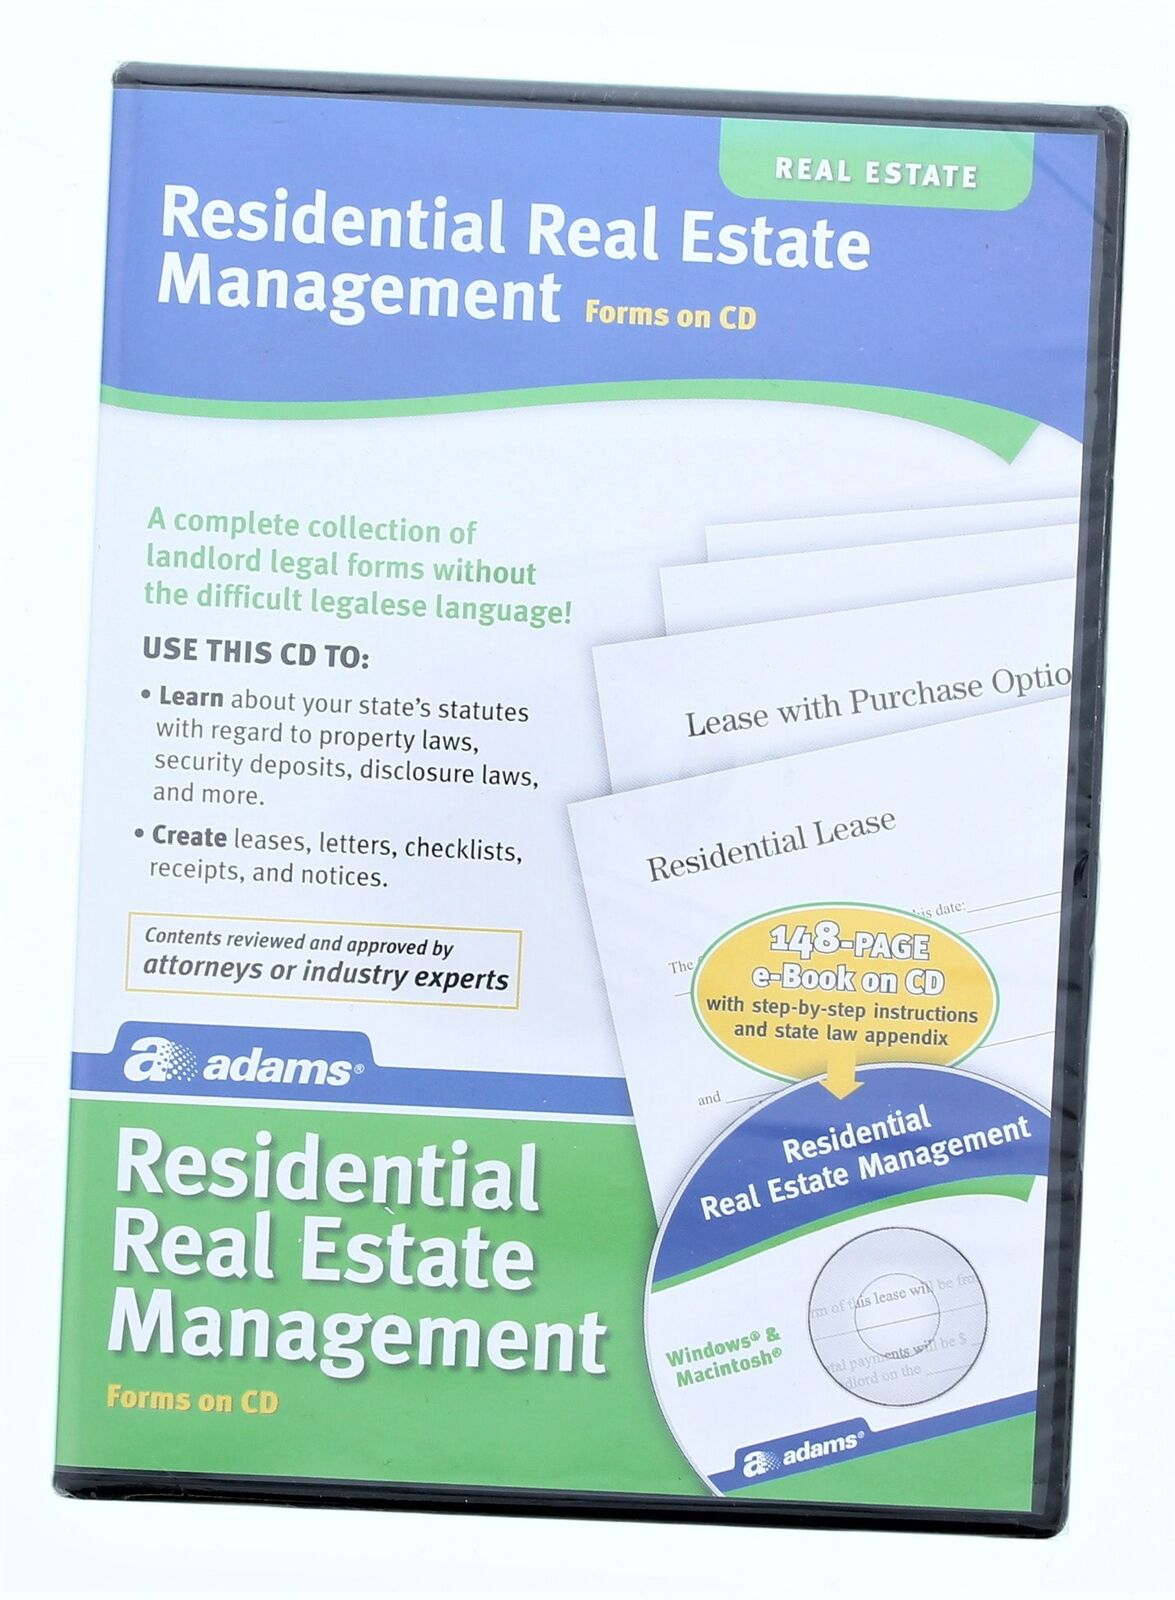 ADAMS Residential Real Estate Management Software